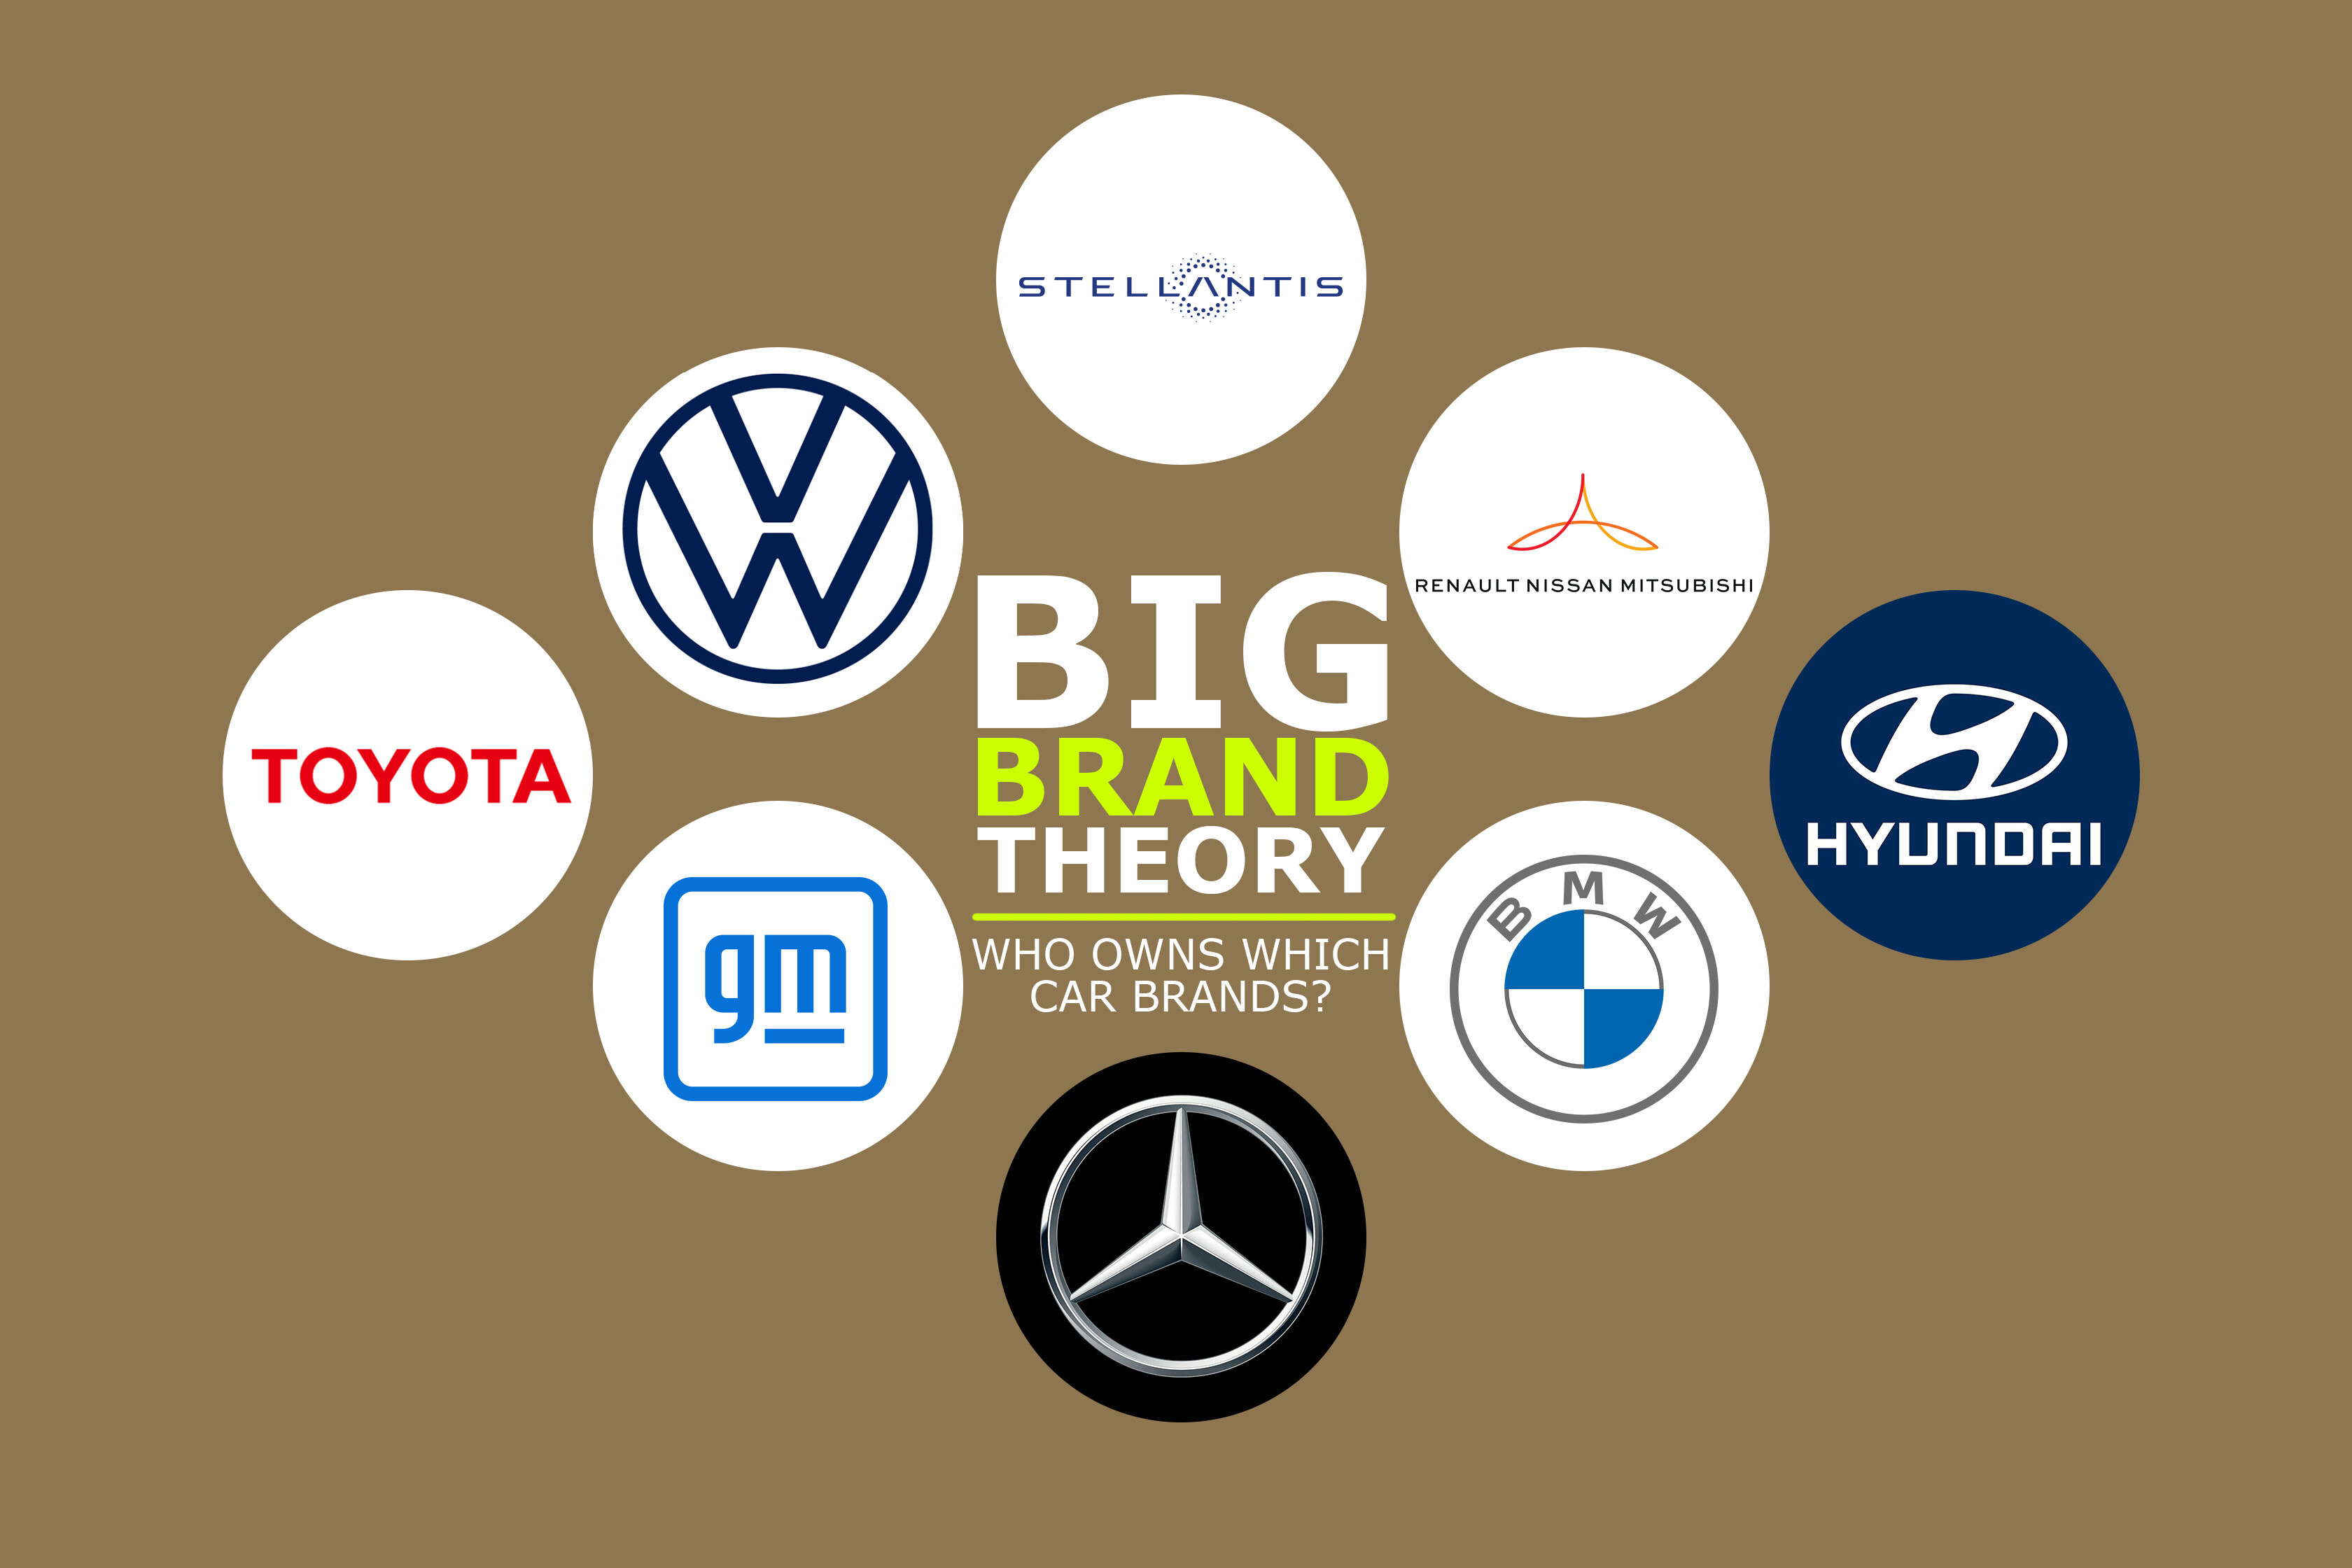 Auto Manufacturer Family Tree Who Owns What